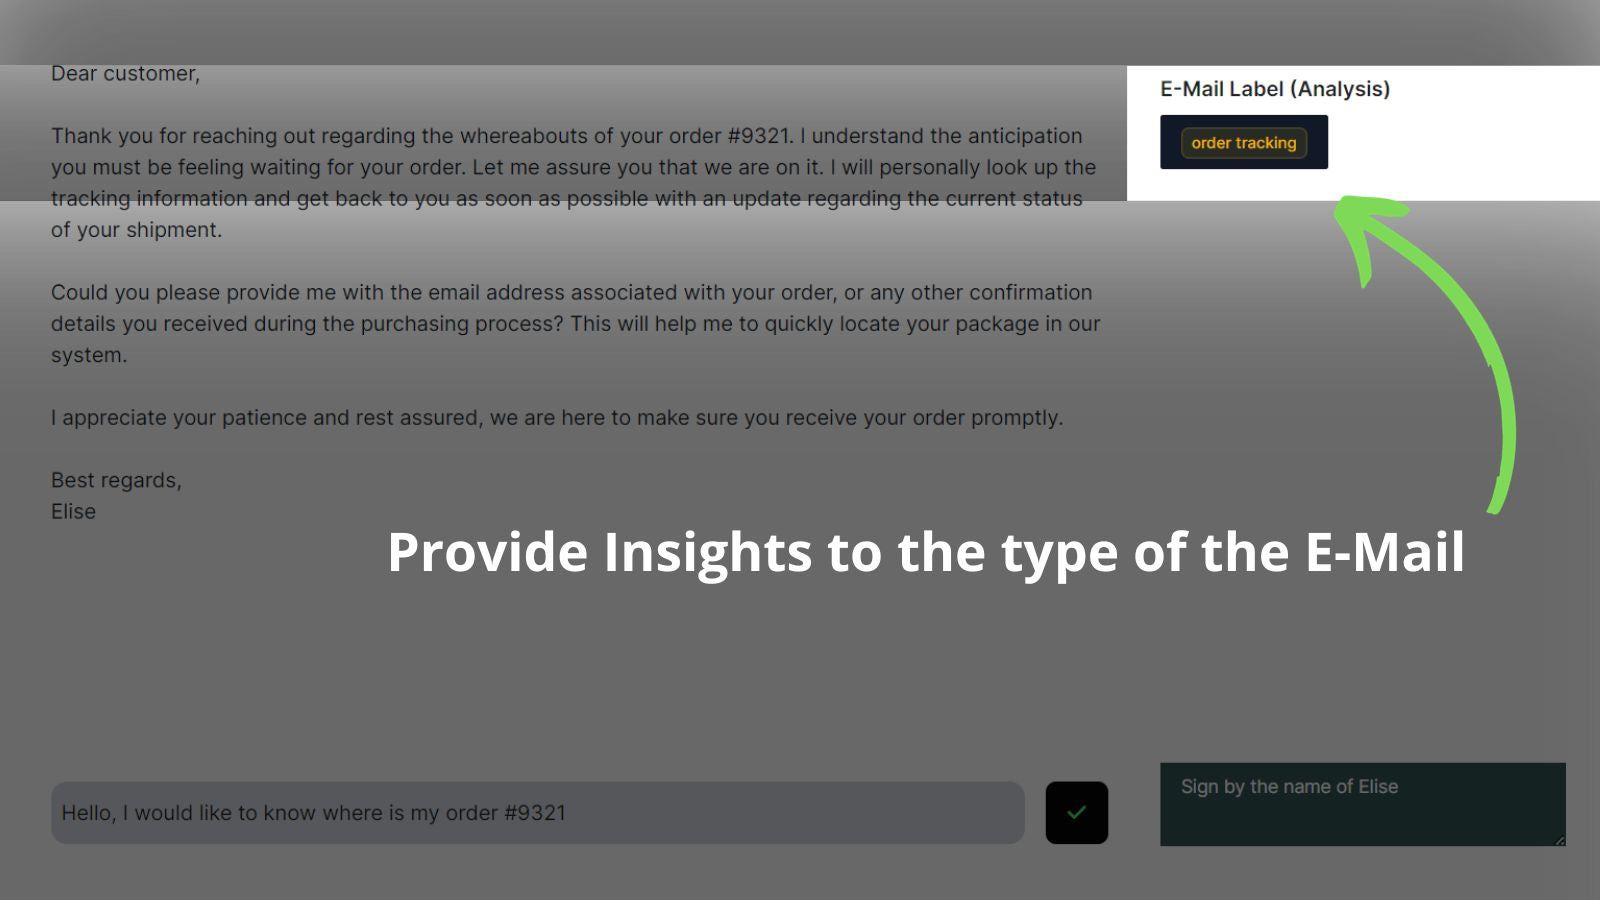 Provide Insights to the type of the E-Mail